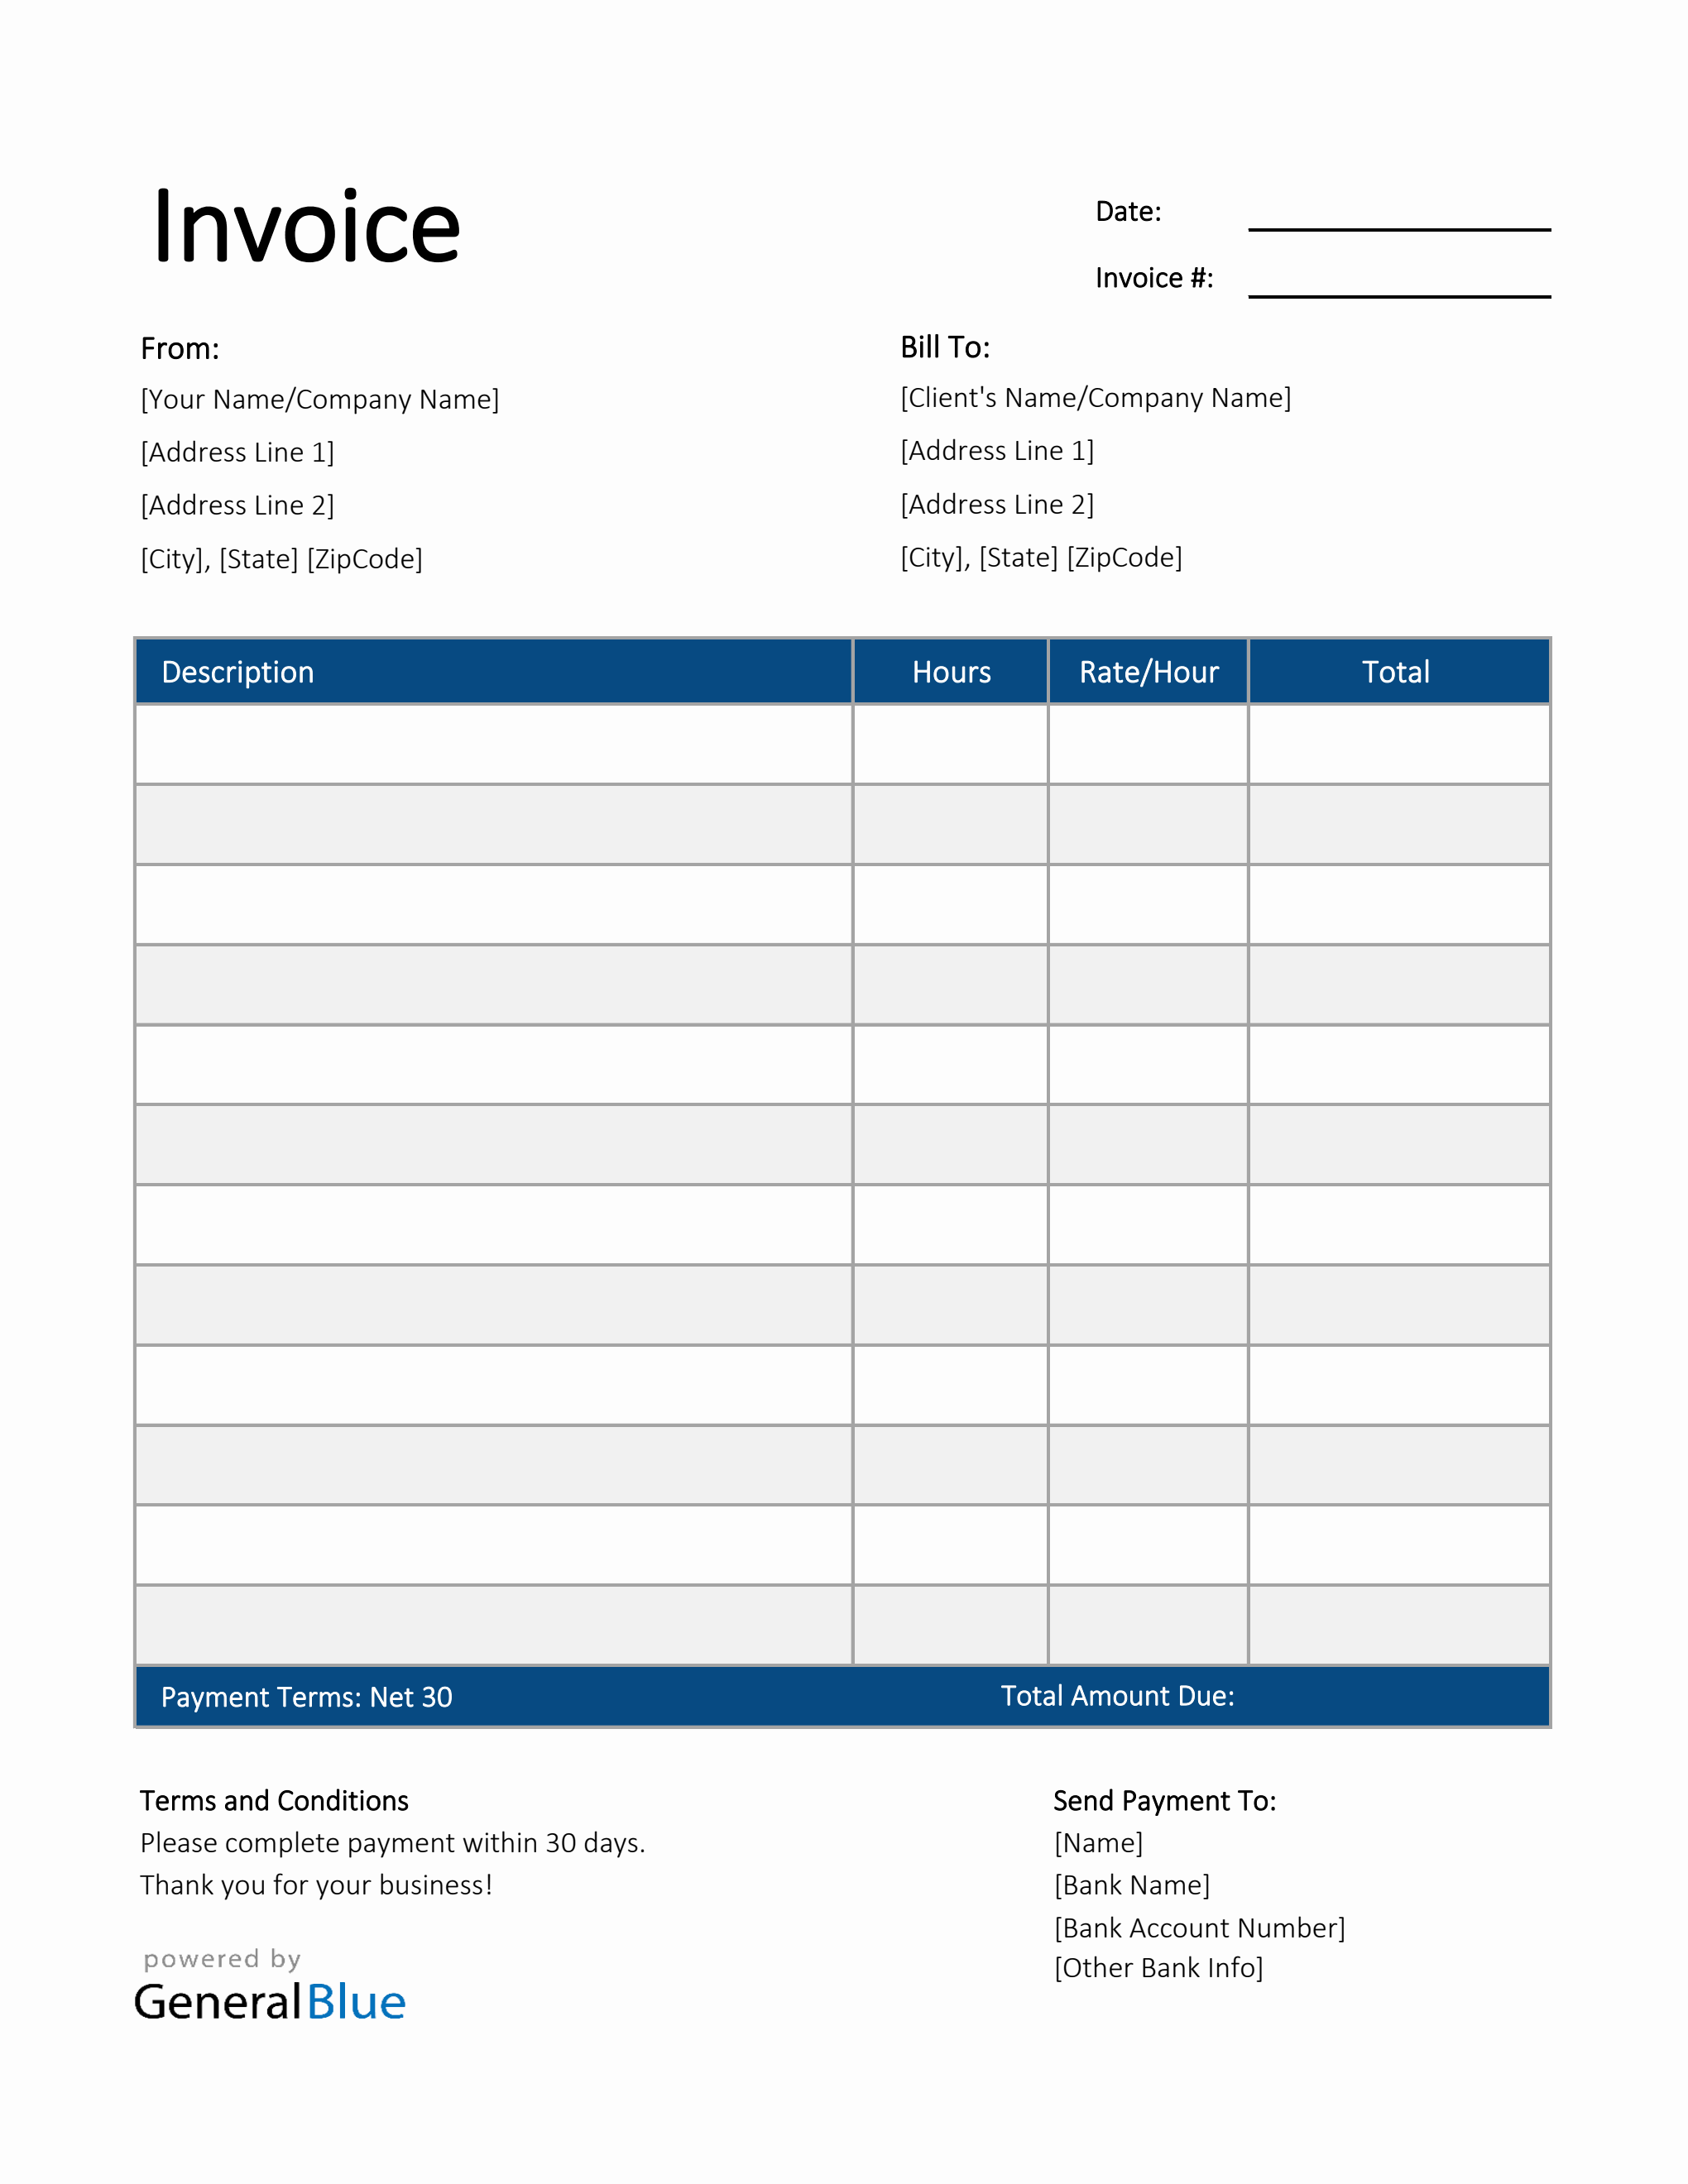 Freelance Hourly Invoice Template in Excel (Striped) Intended For Invoice For Work Done Template